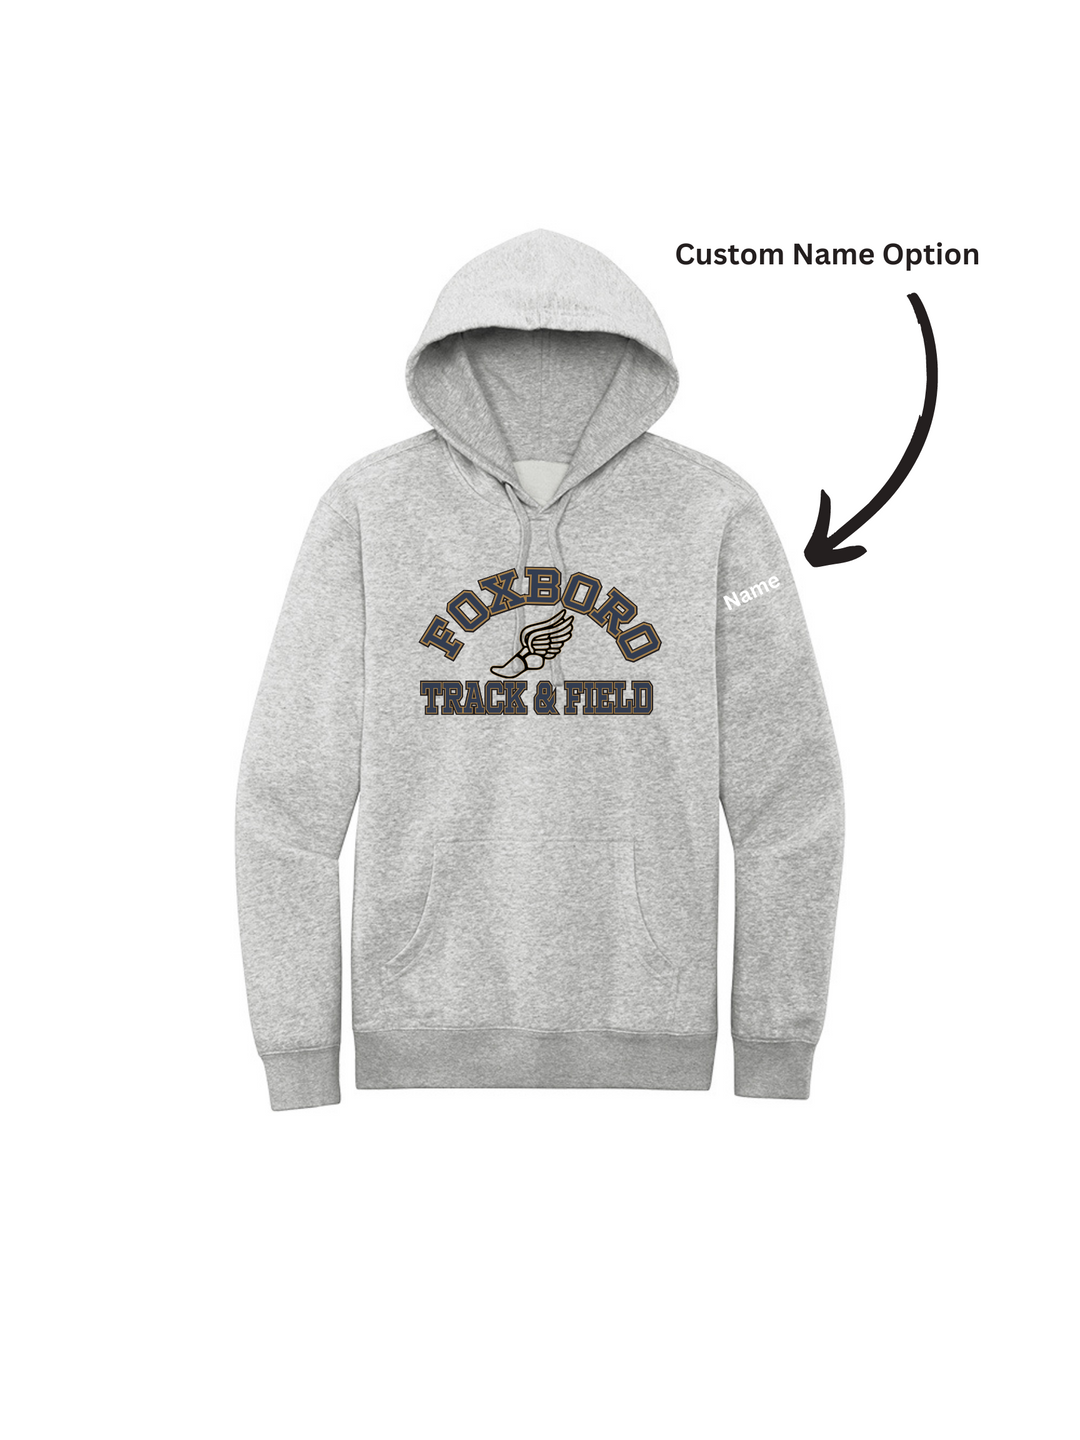 Foxboro Track and Field -  V.I.T Unisex Fleece Hoodie (DT6100)